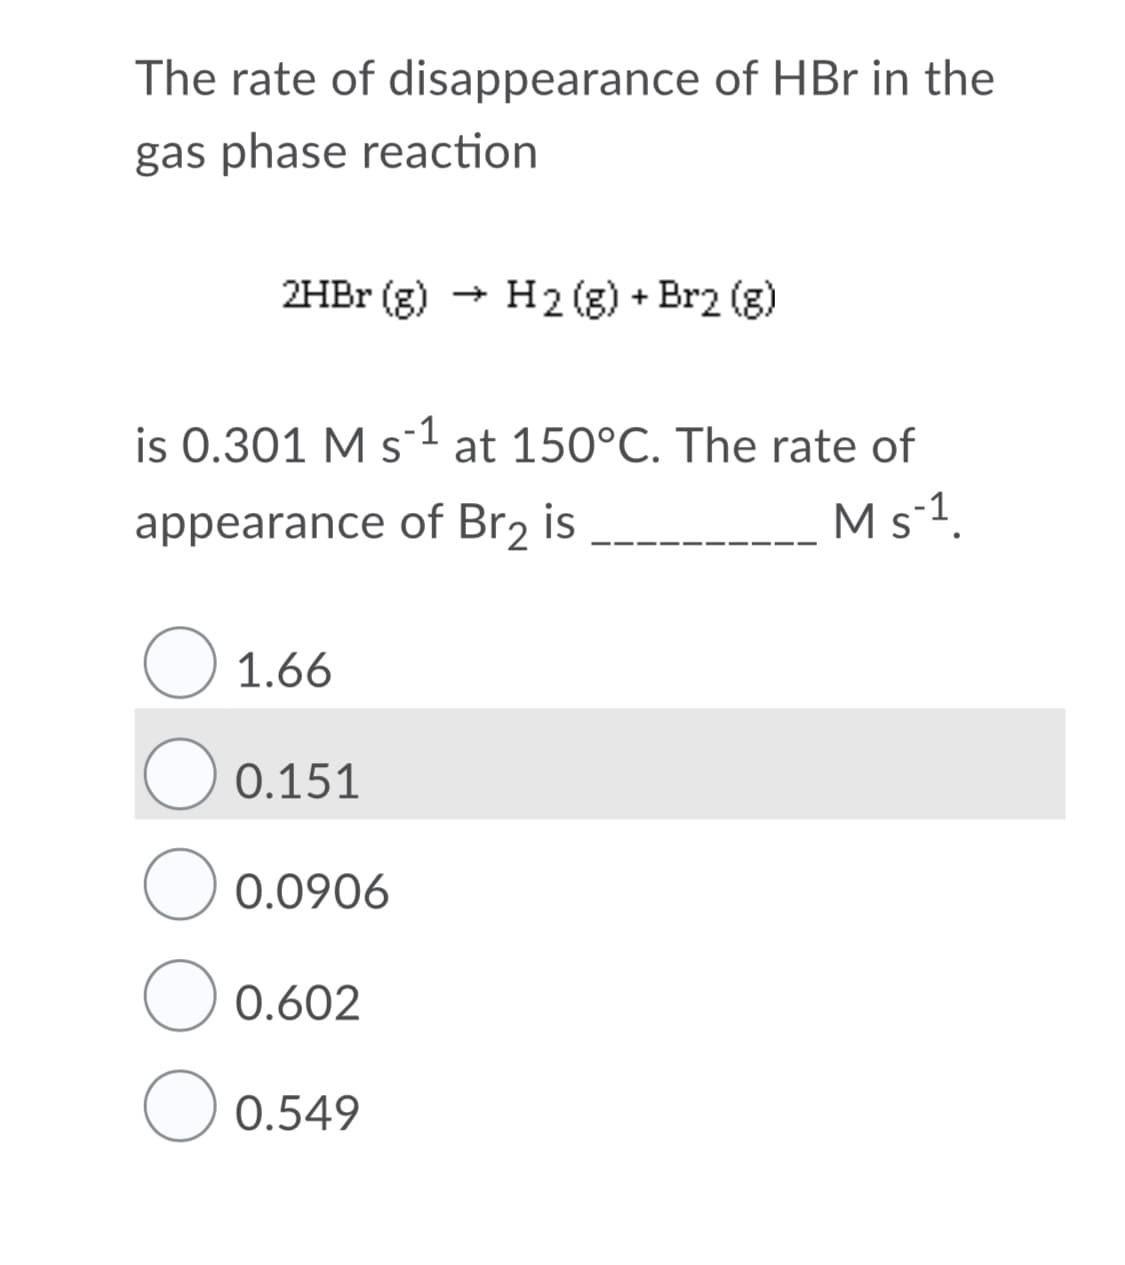 The rate of disappearance of HBr in the
gas phase reaction
+ H2 (g) + Br2 (g)
2HBR (g)
is 0.301 M s-1 at 150°C. The rate of
Ms-1.
appearance of Br2 is
1.66
0.151
0.0906
O 0.602
0.549
